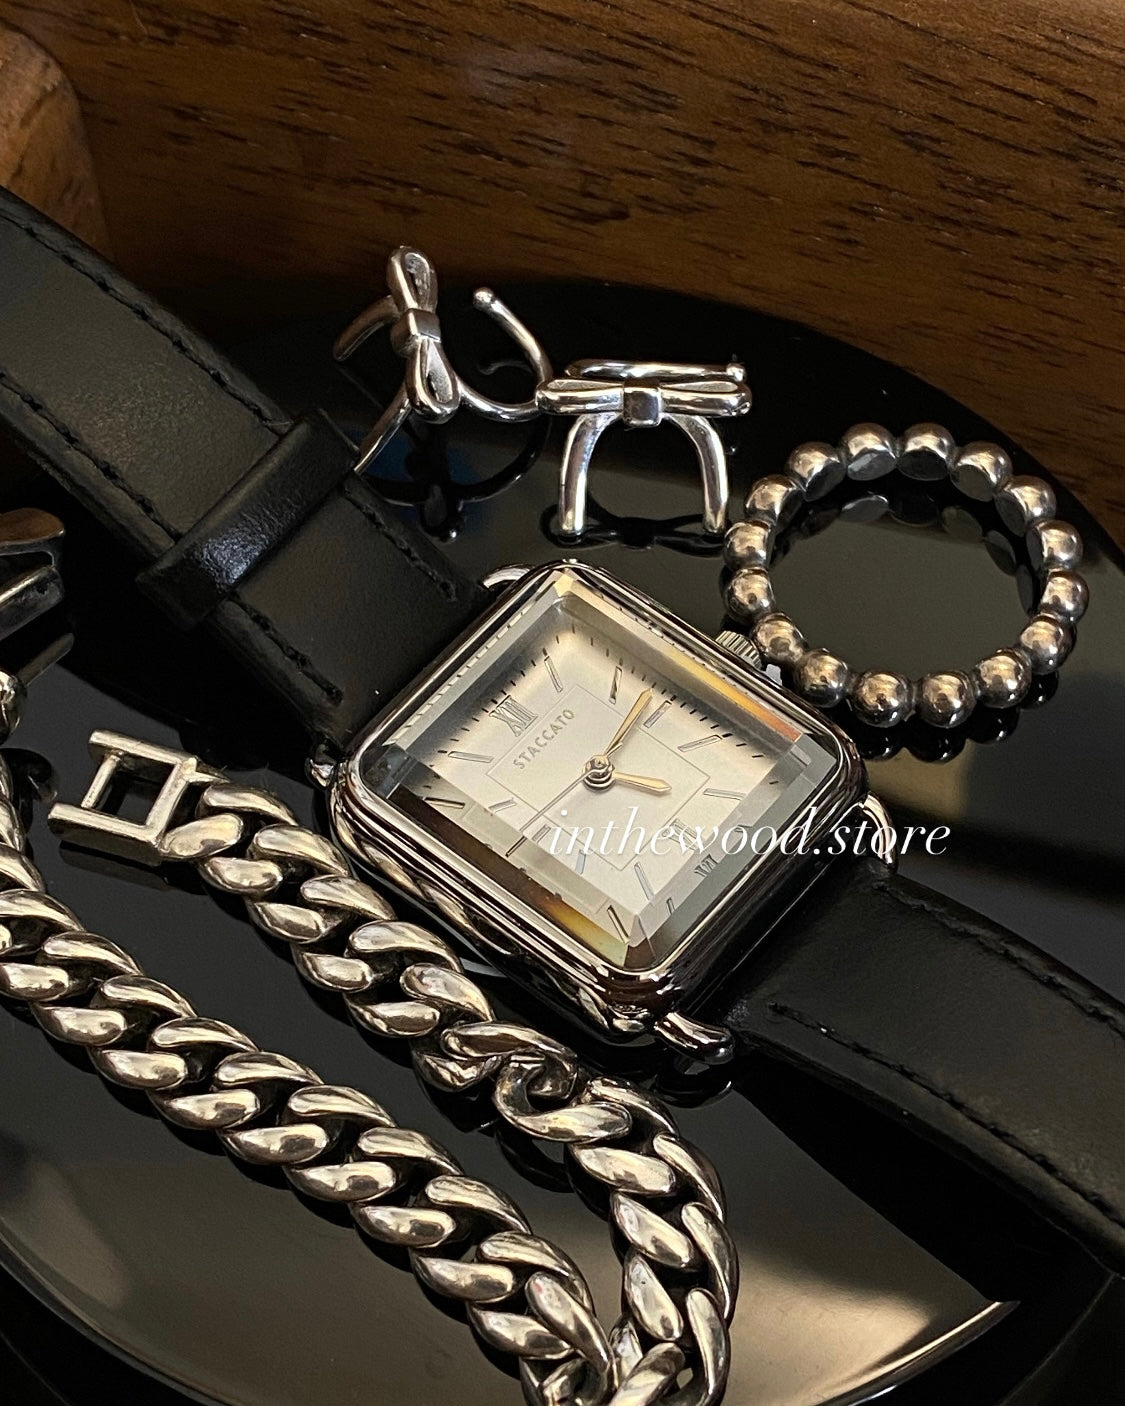 Square Crystal Watch